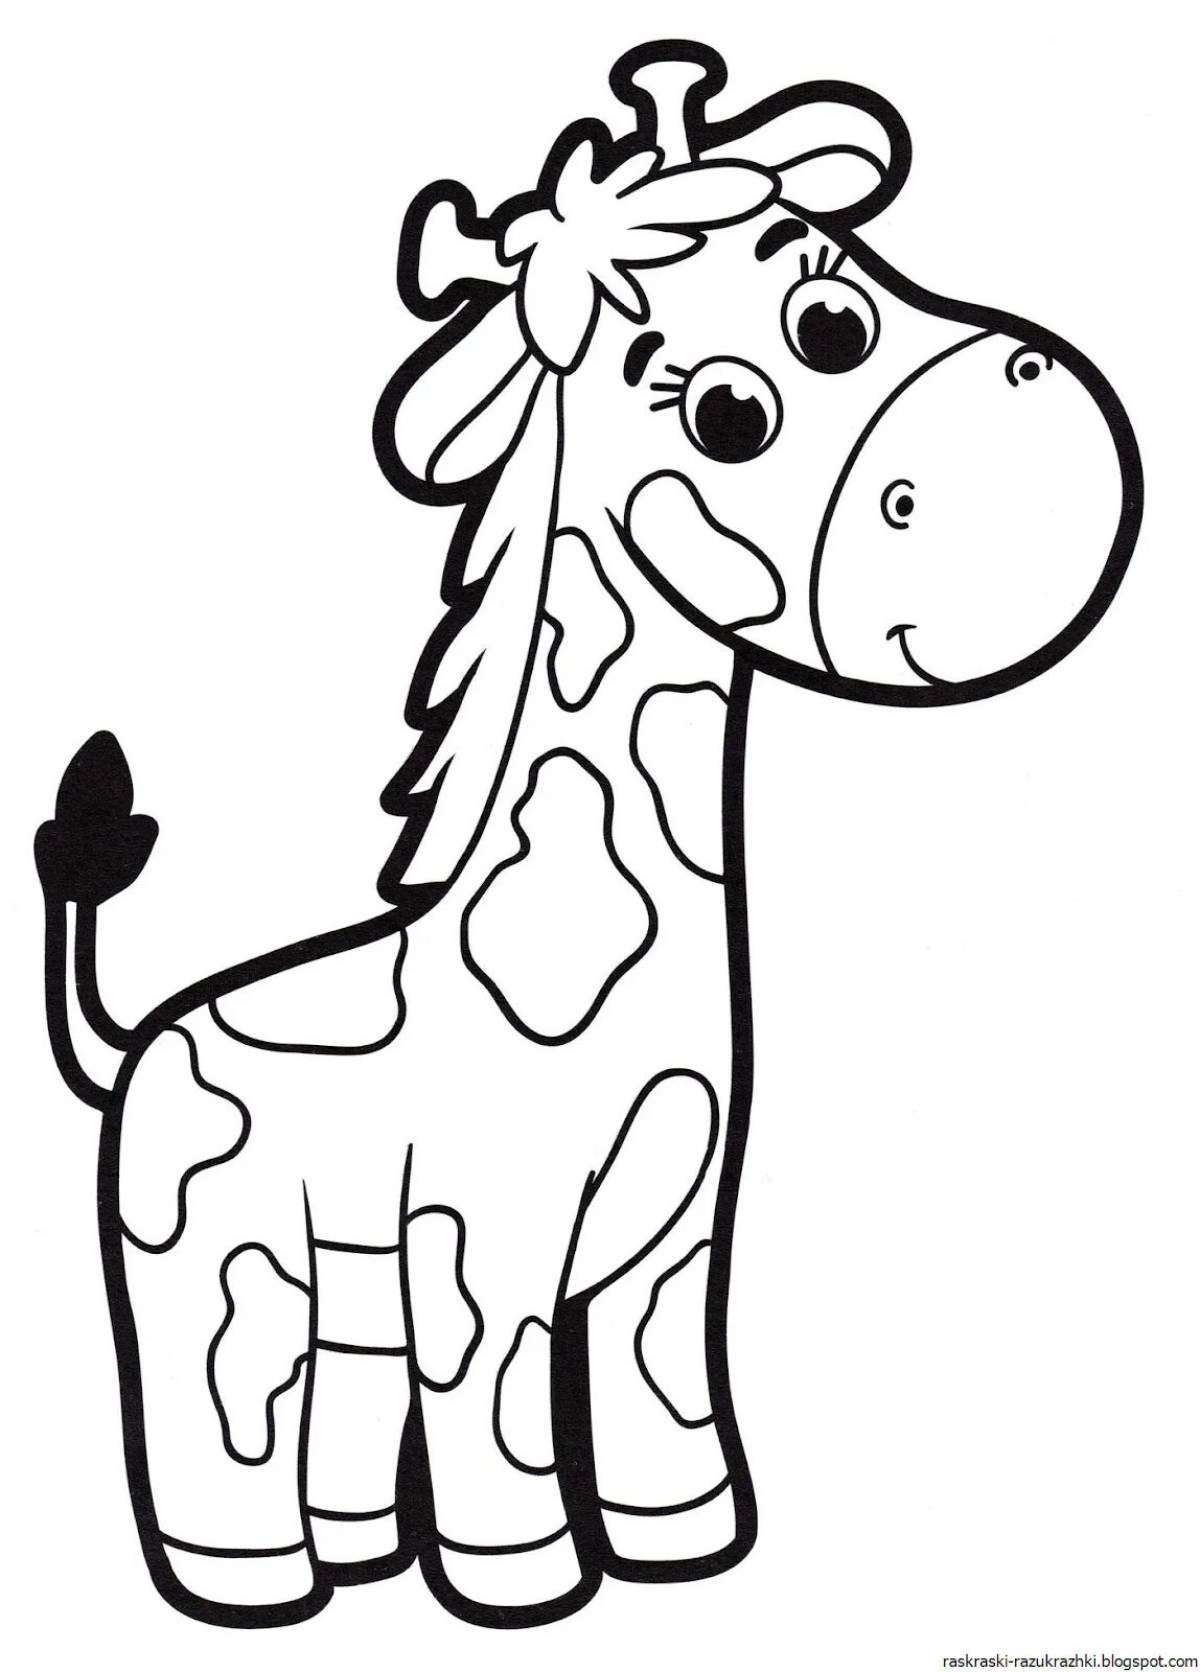 Exquisite giraffe coloring page for younger students